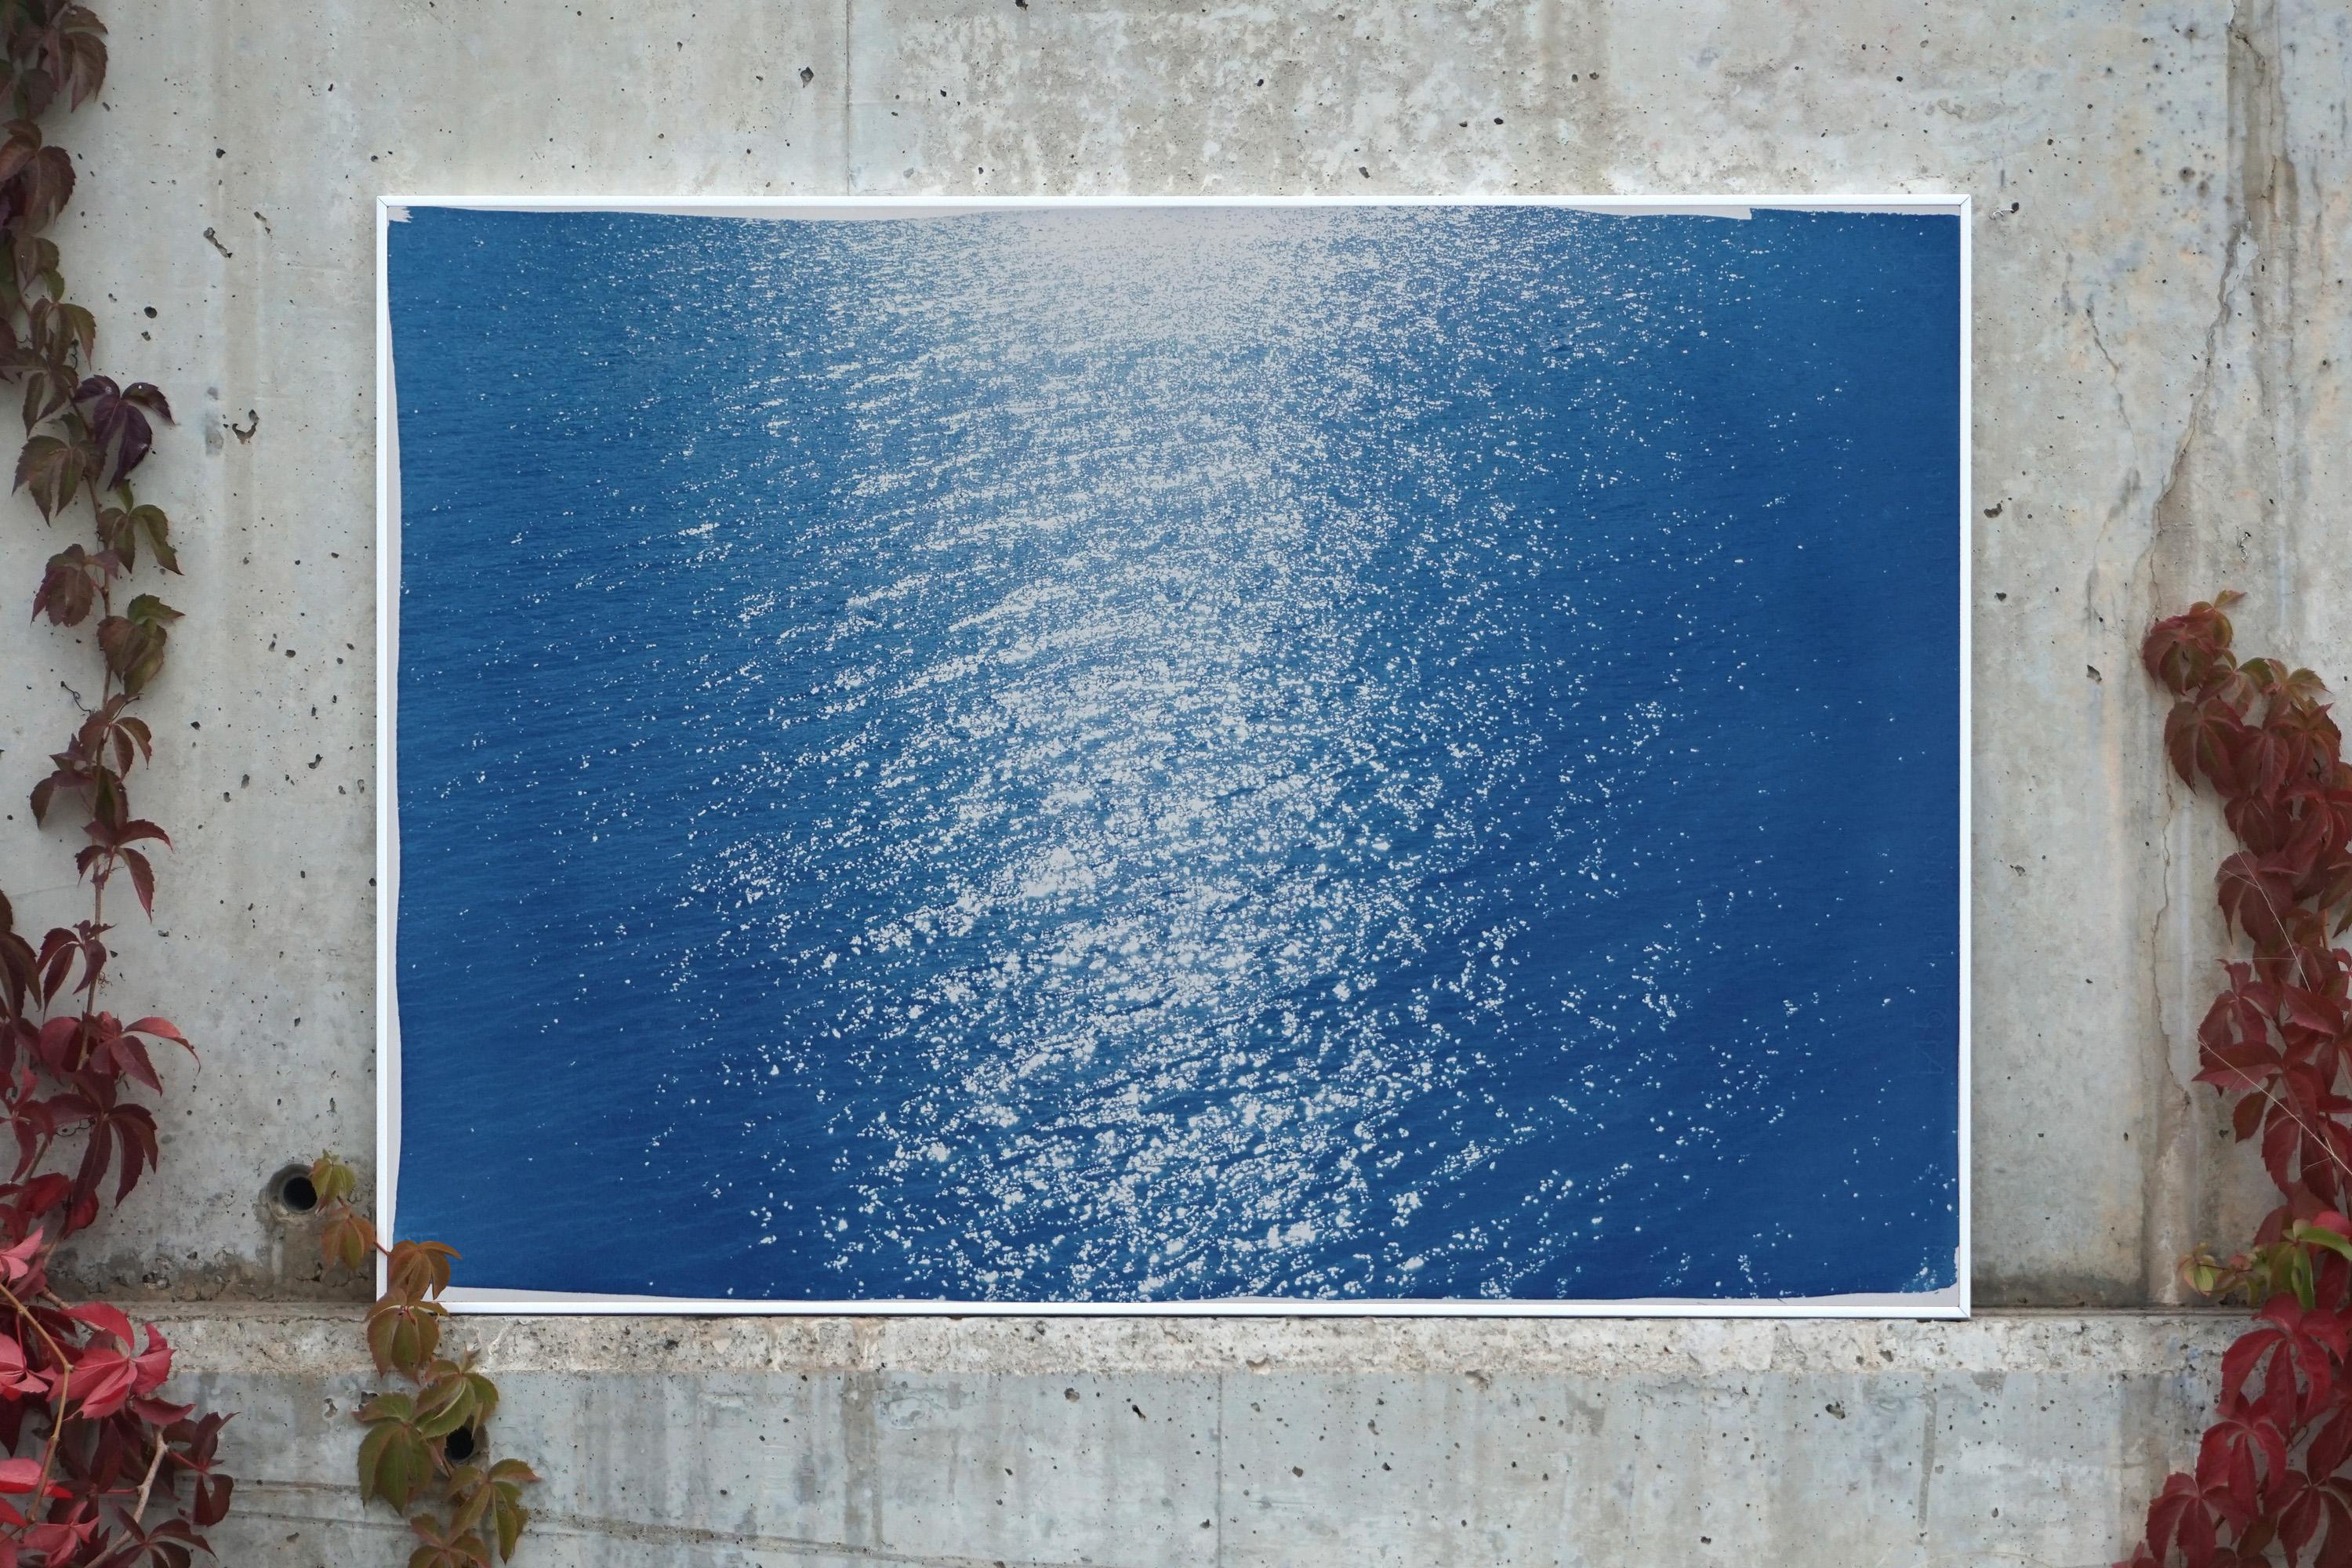 Tuscany Sea Reflections Handprinted Cyanotype Large Seascape Water Blue Paper - Contemporary Print by Kind of Cyan